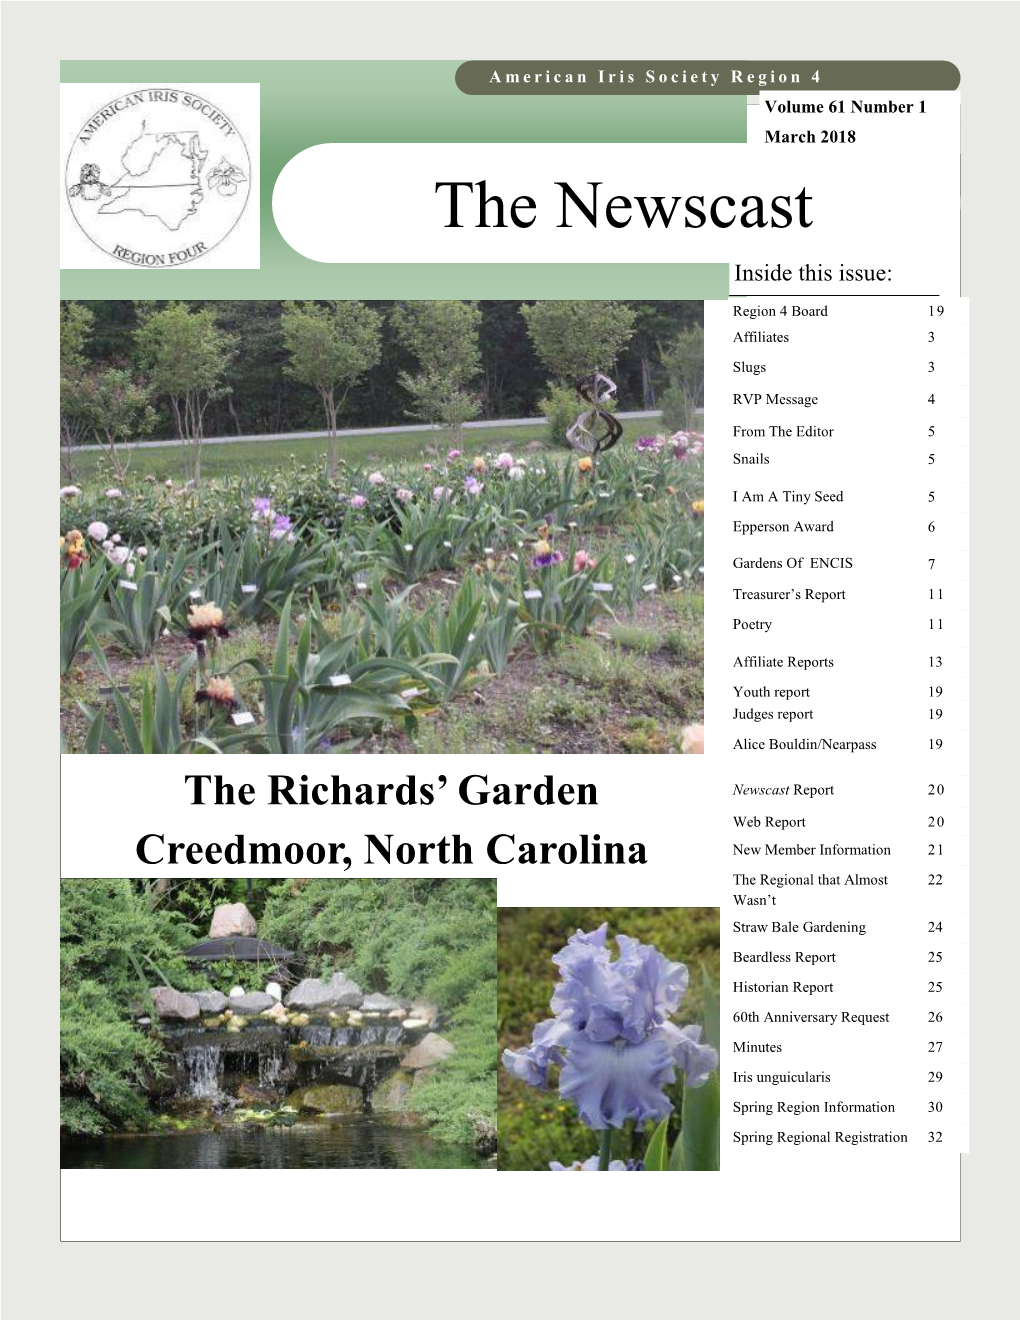 March 2018 the Newscast Inside This Issue